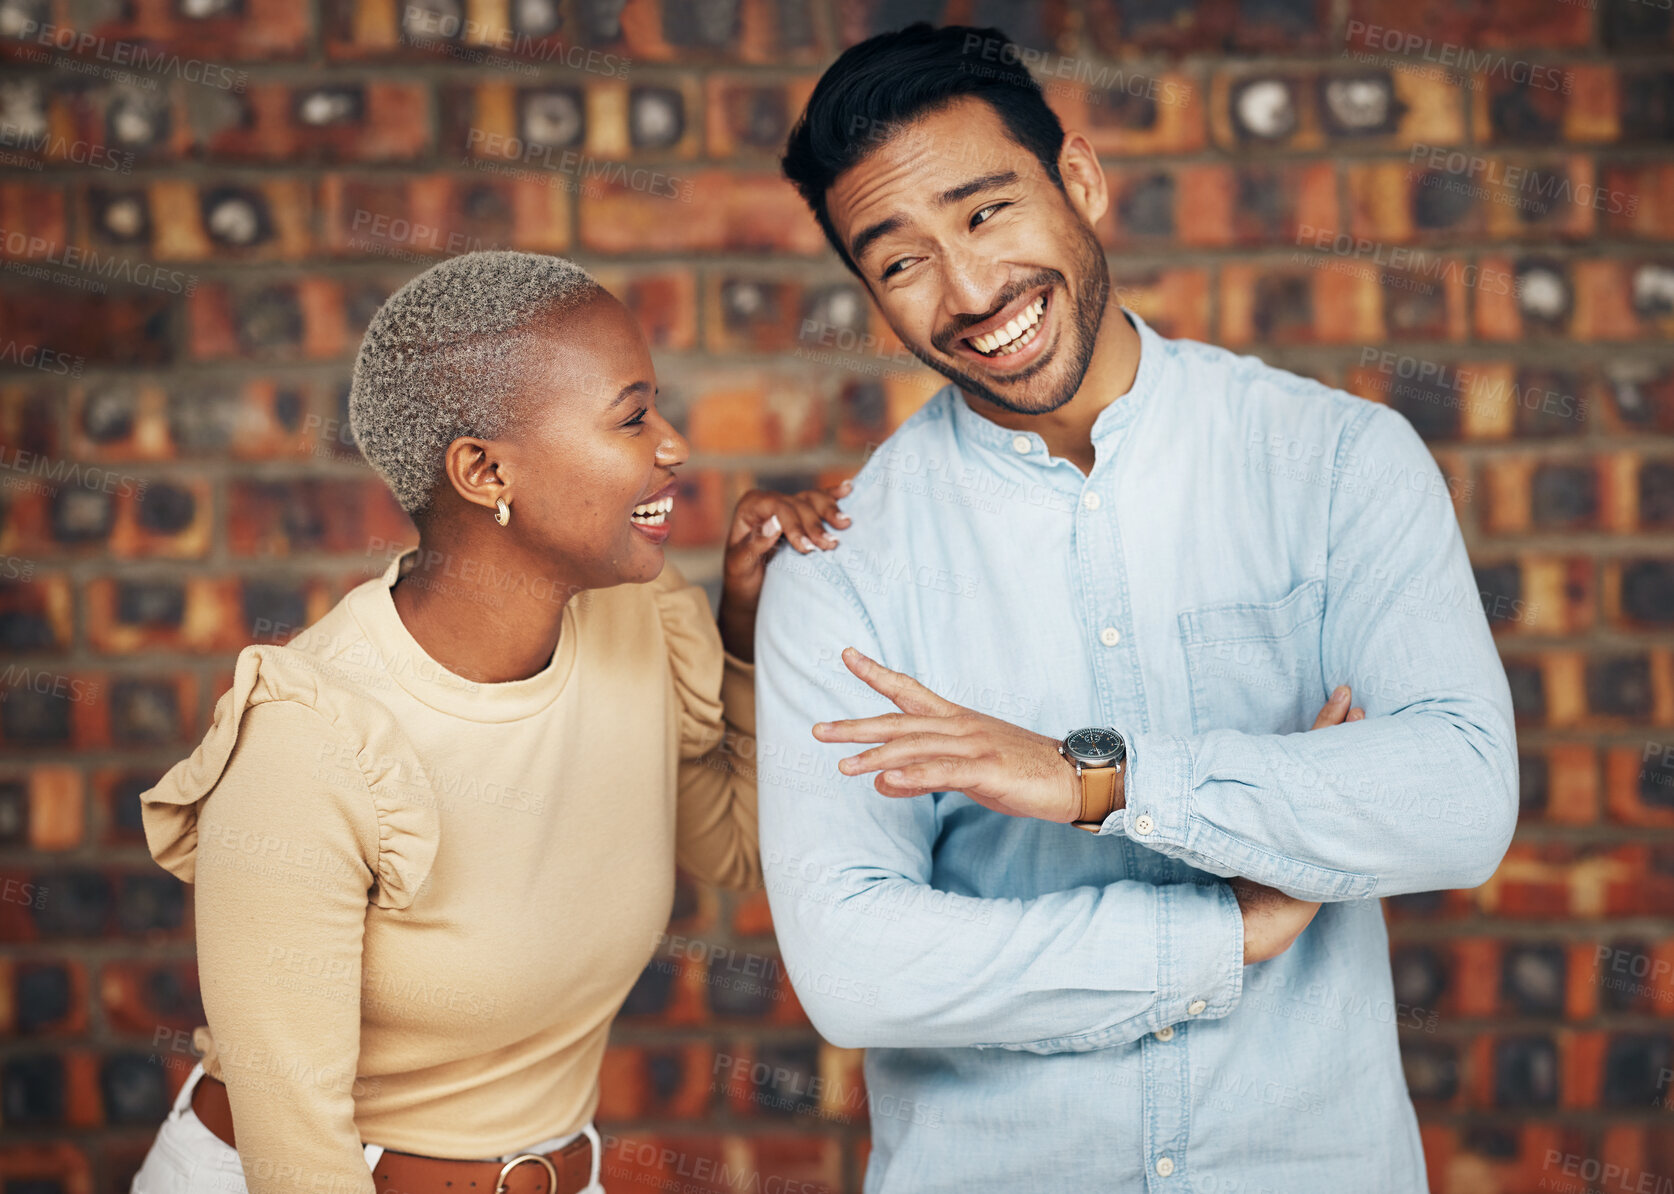 Buy stock photo Young, professional team and partnership, laugh with teamwork and friends against wall background. Happy working together, creative pair and diversity, black woman and man, collaboration and trust